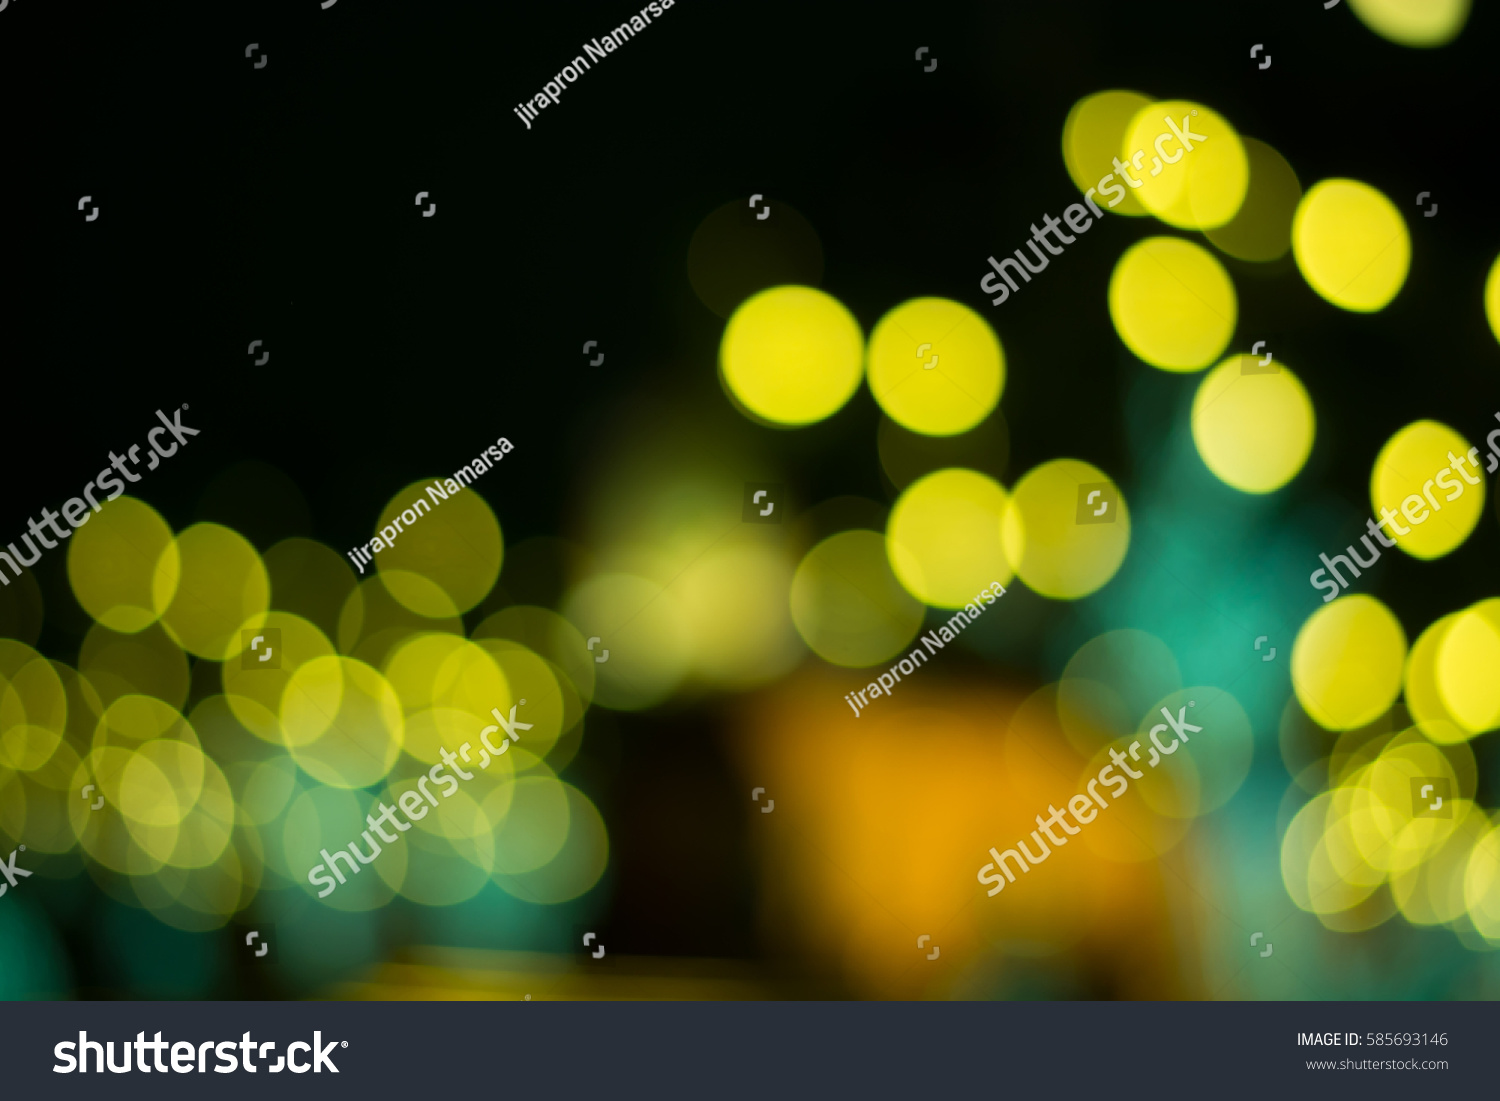 Park at night and the light, beautiful.Night city street lights  background,Lights blurred #585693146